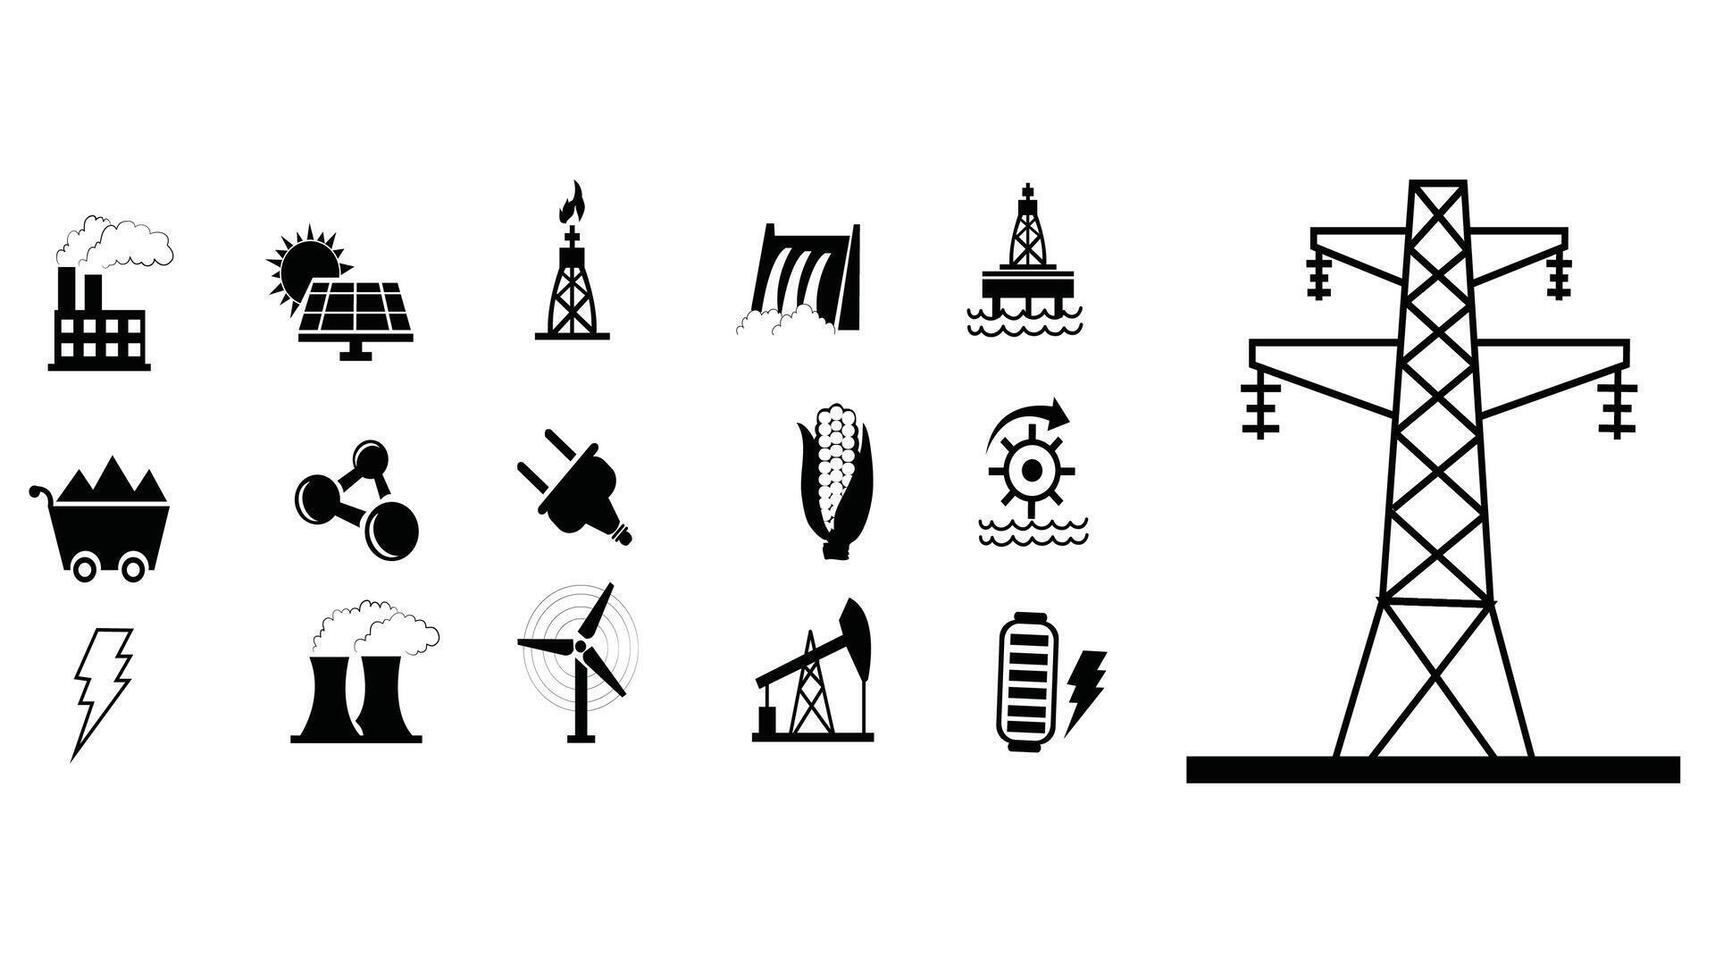 Energy generating station. Power plant flat line icons set. Vector illustration of alternative renewable energy sources including solar, wind, hydro, tidal, geothermal and biomass power